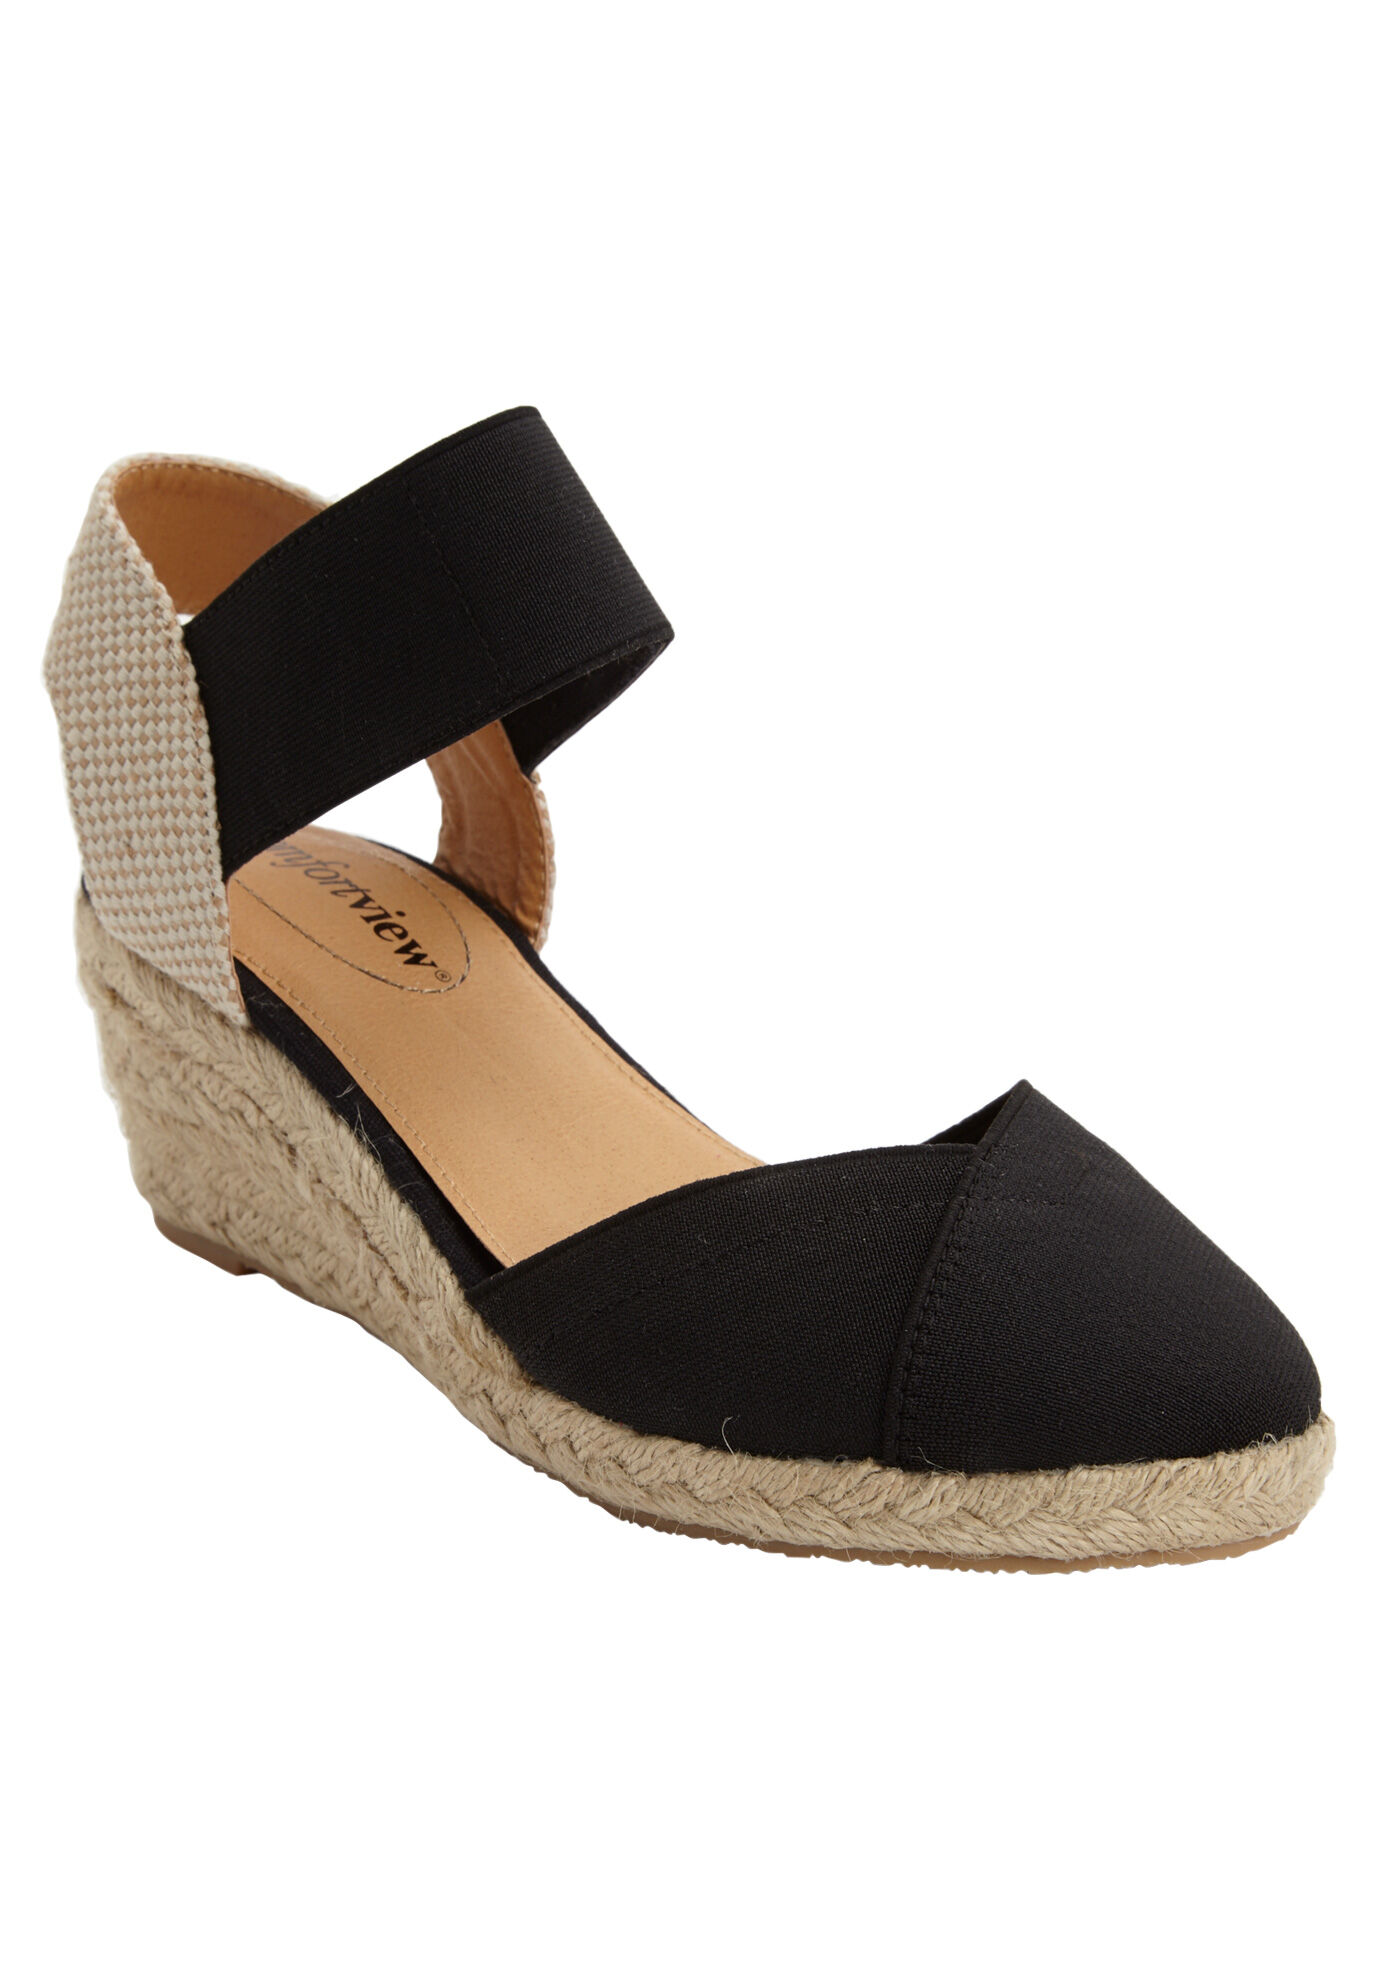 closed toe wedges wide width